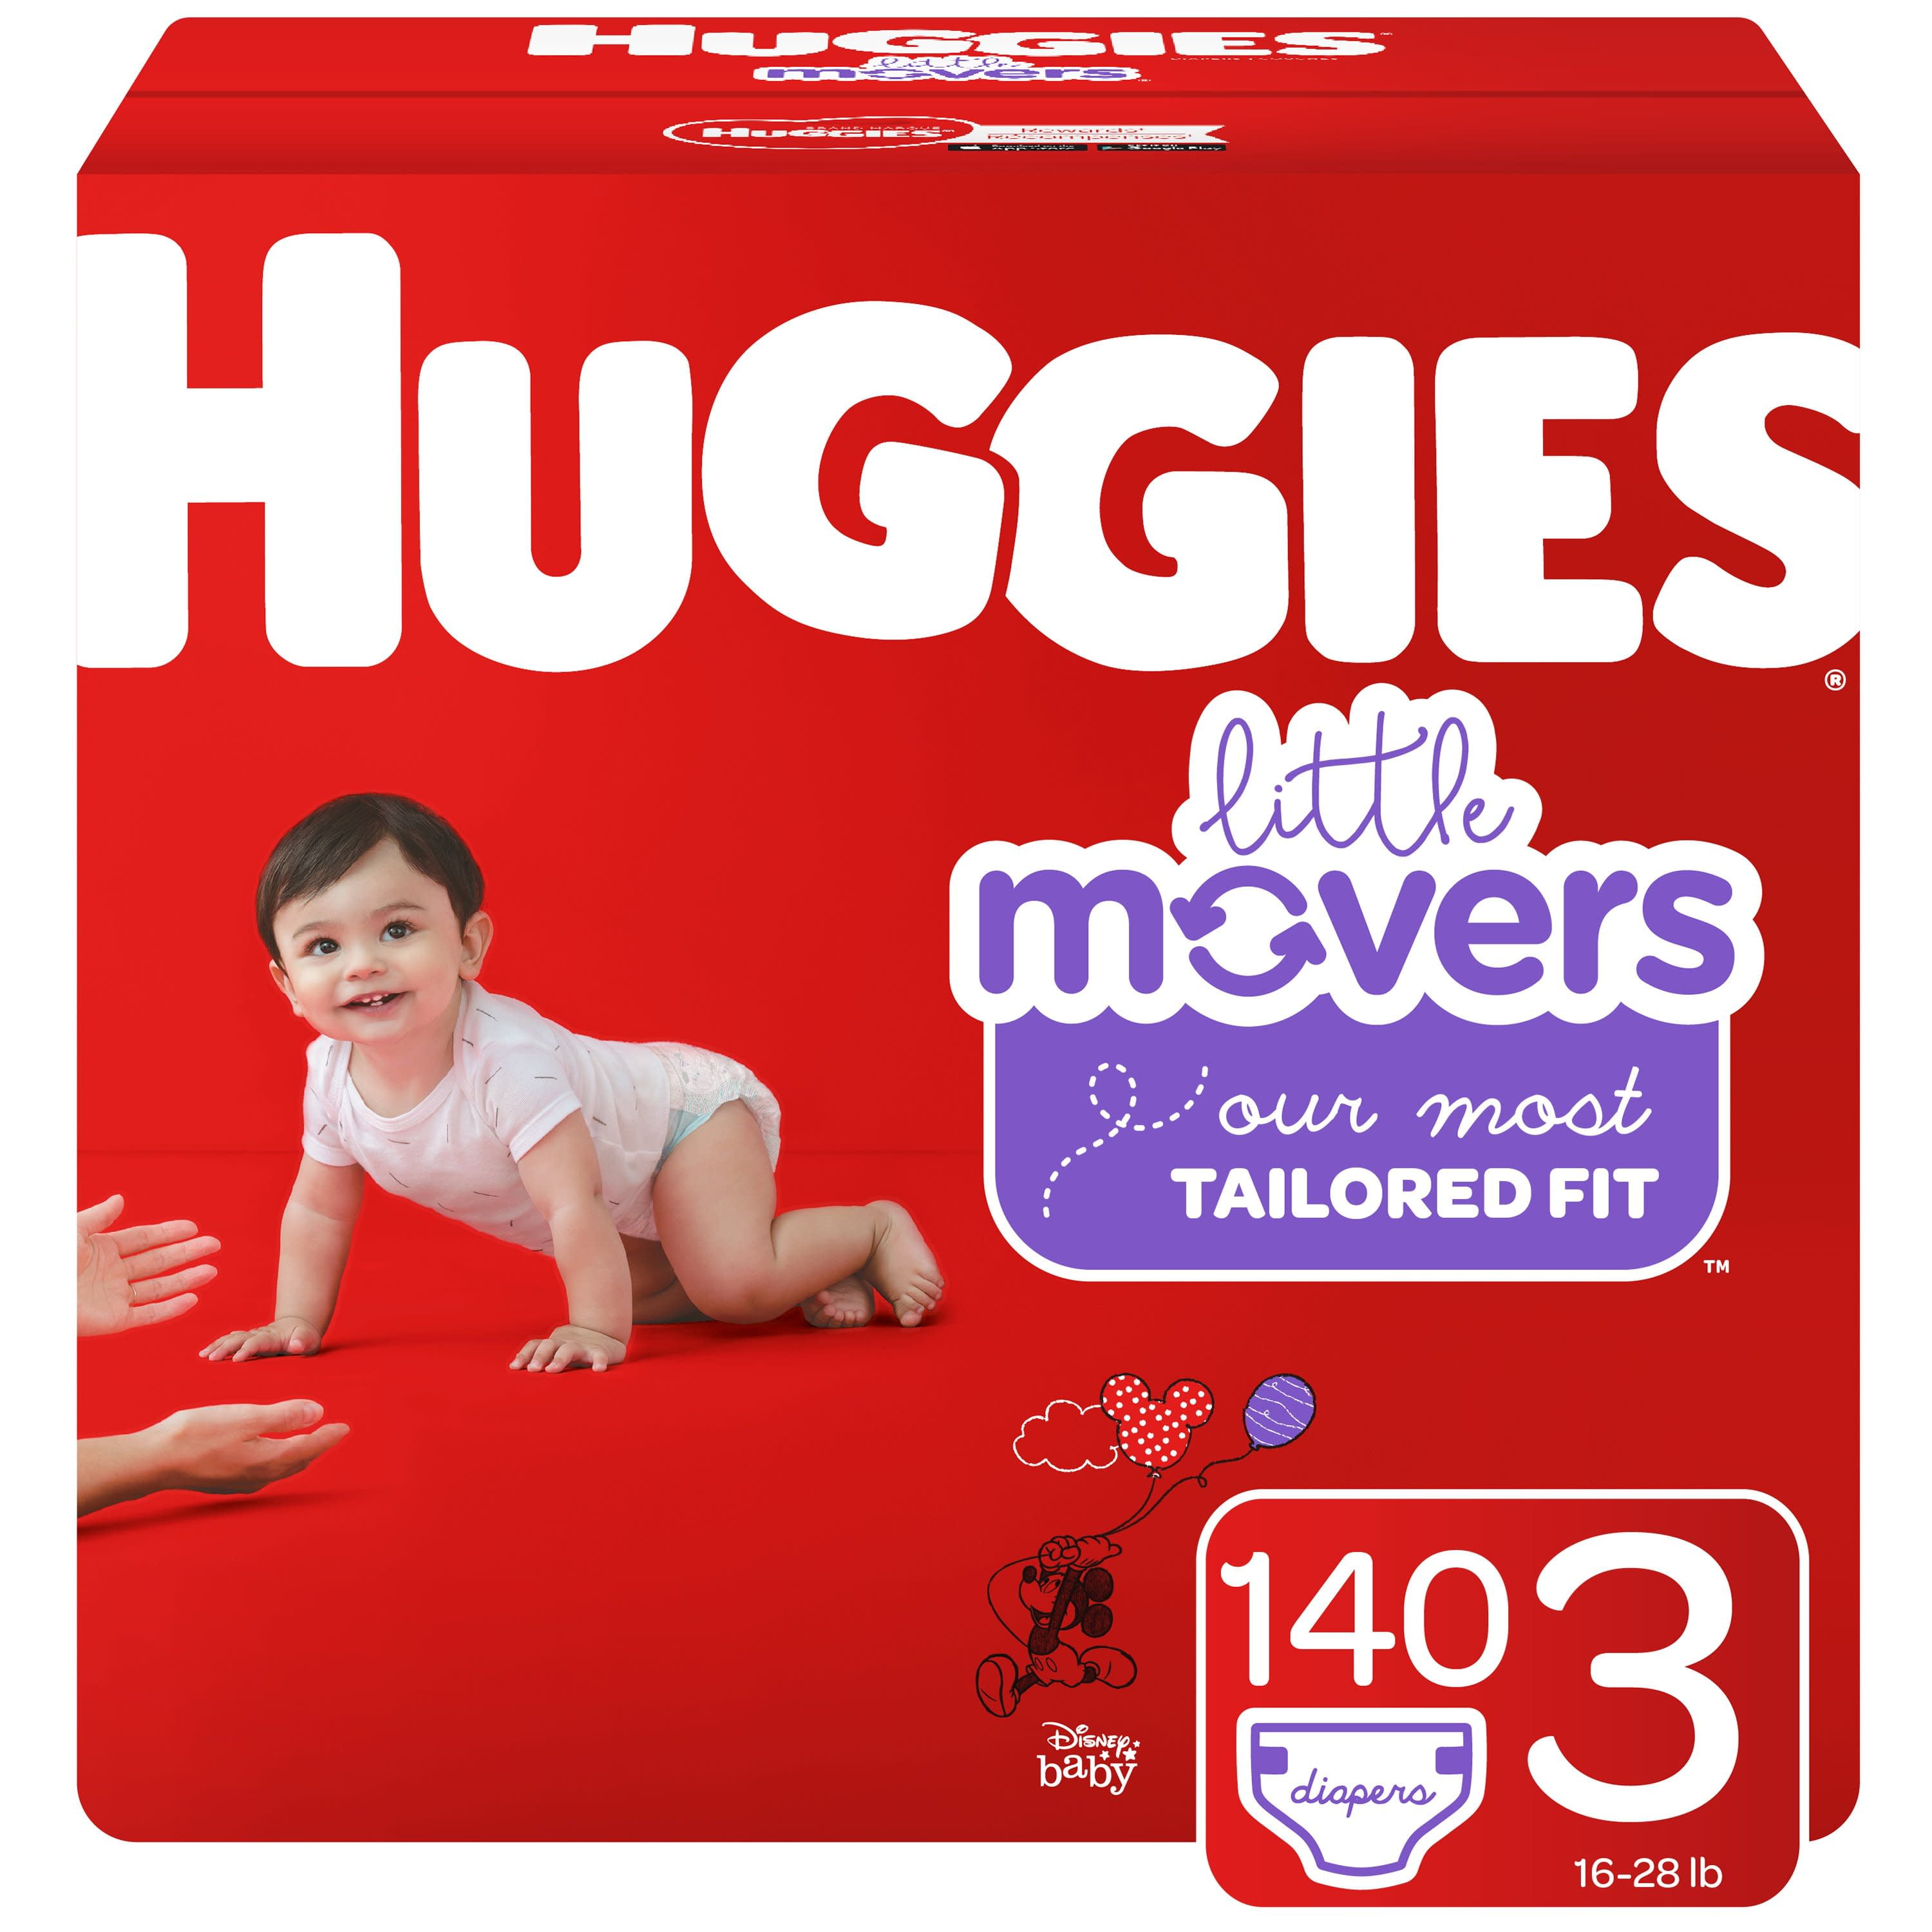 Huggies Dry Comfort Size 3 Disposable Nappies 30 Pack, Disposable Nappies, Nappies, Baby